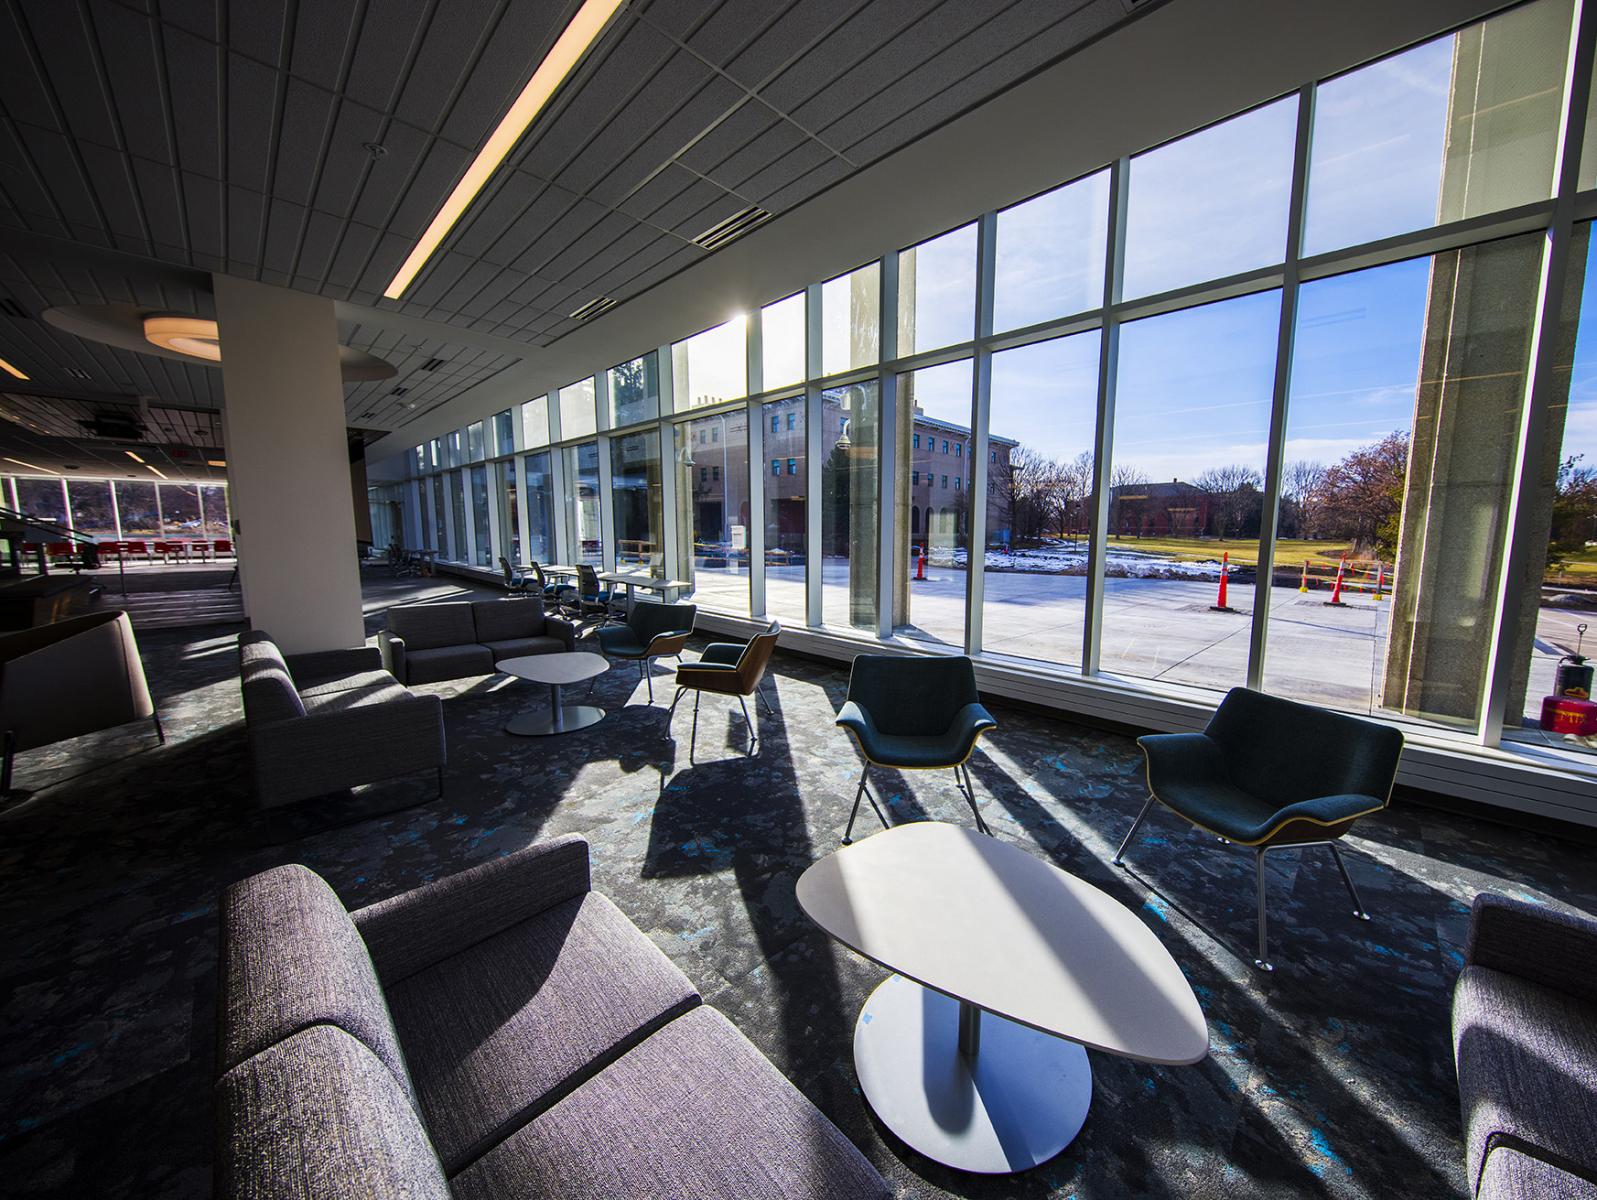 Inside the Dinsdale Learning Commons, facing the wall of windows with a view to the west.